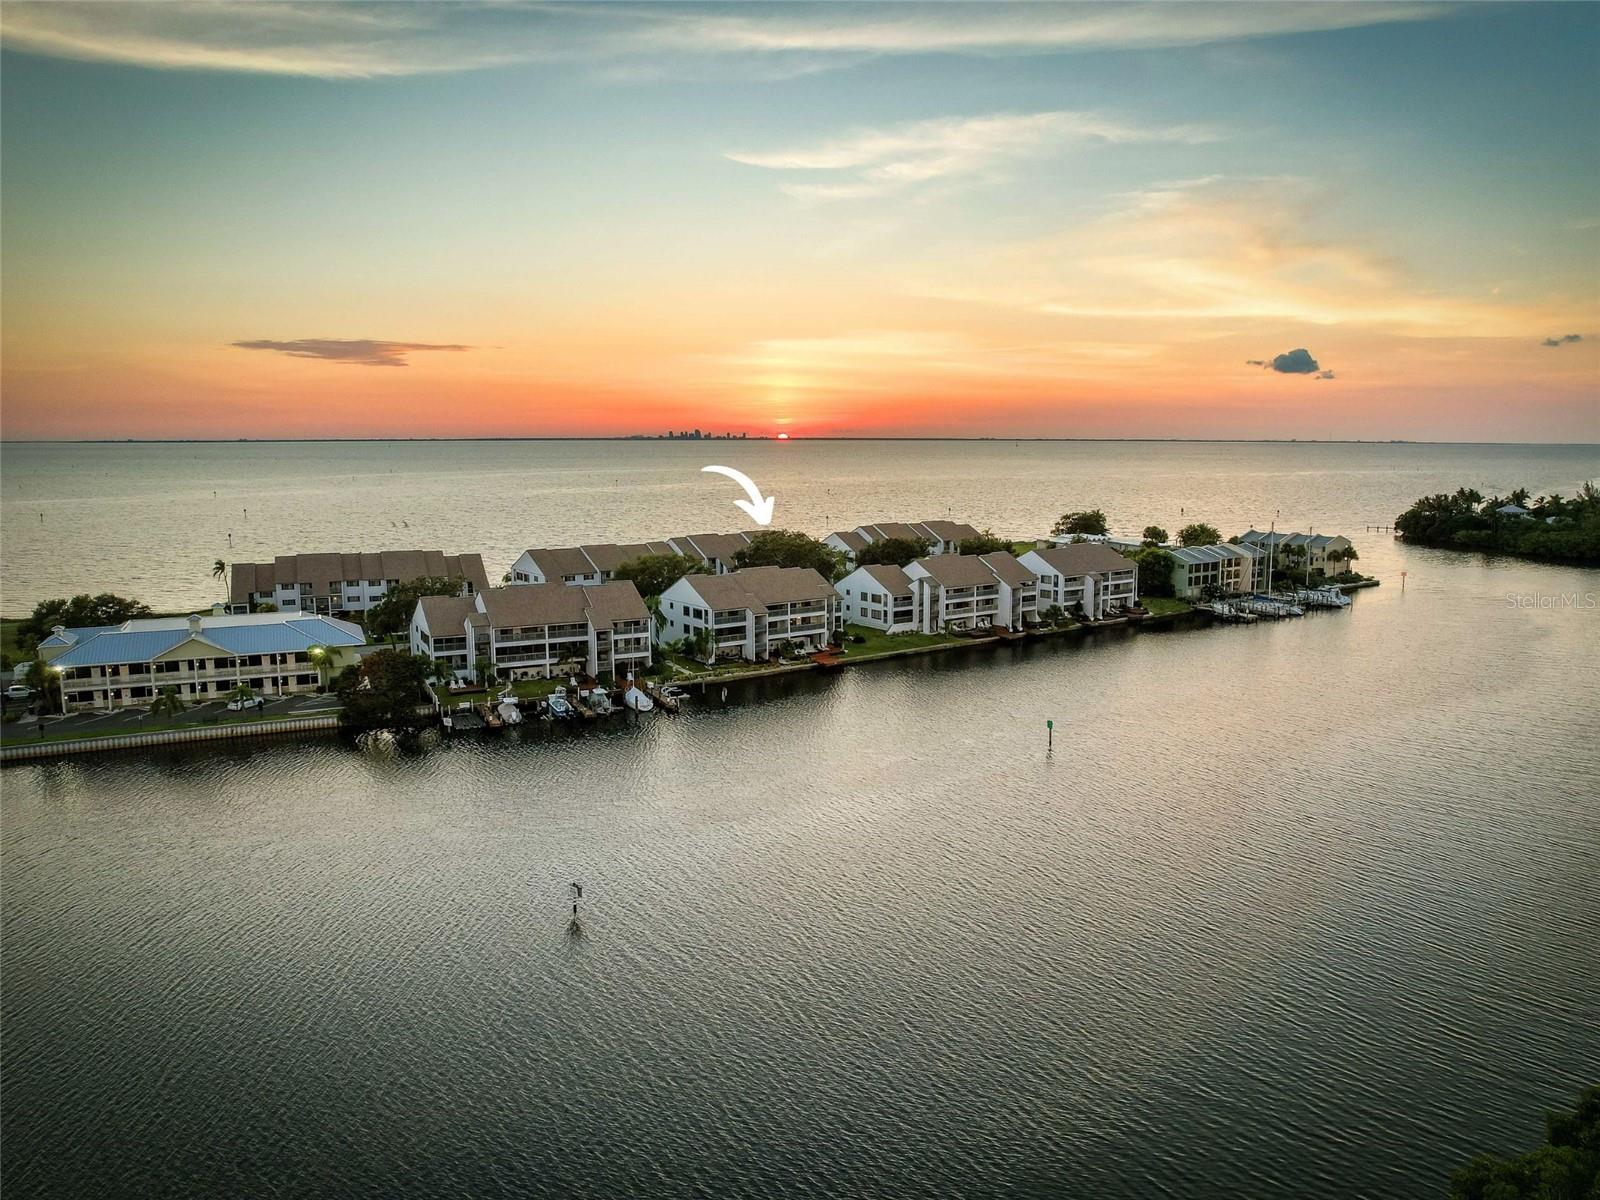 WELCOME TO BAHIA DEL SOL ~ A BEAUTIFUL TAMPA BAY WATERFRONT COMMUNITY!